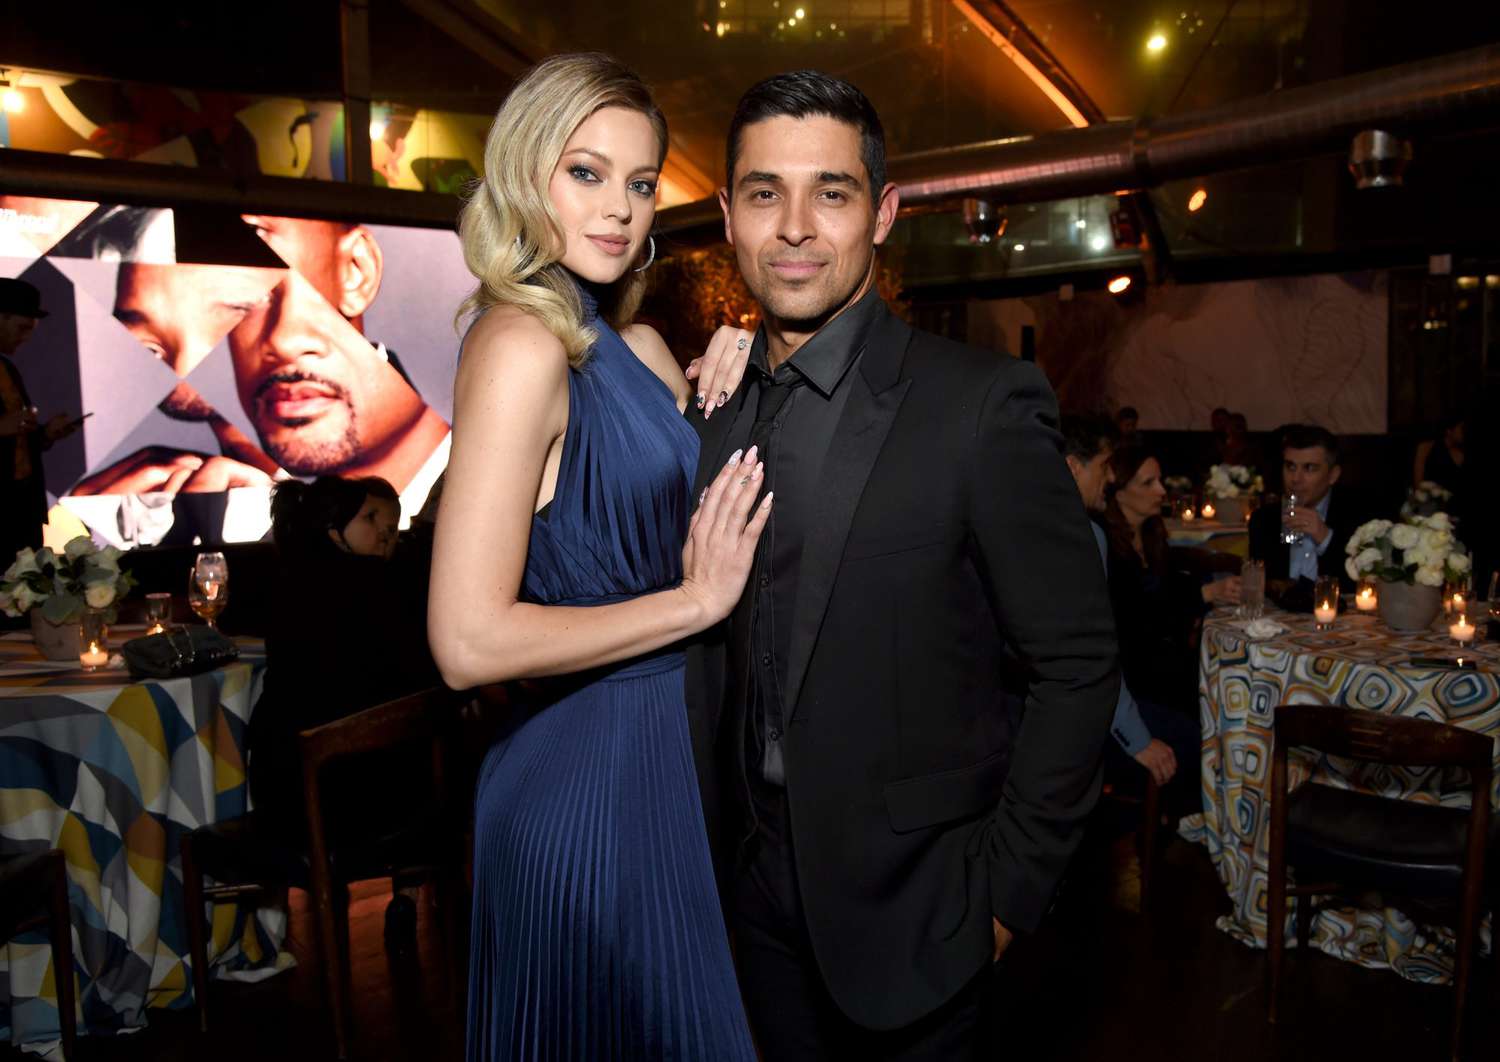 manda Pacheco and Wilmer Valderrama attend The Hollywood Reporter Oscar Nominees Night presented by IHG Hotels and Resorts, and sponsored by Heineken and Amazon Ads at Spago on March 07, 2022 in Beverly Hills, California.